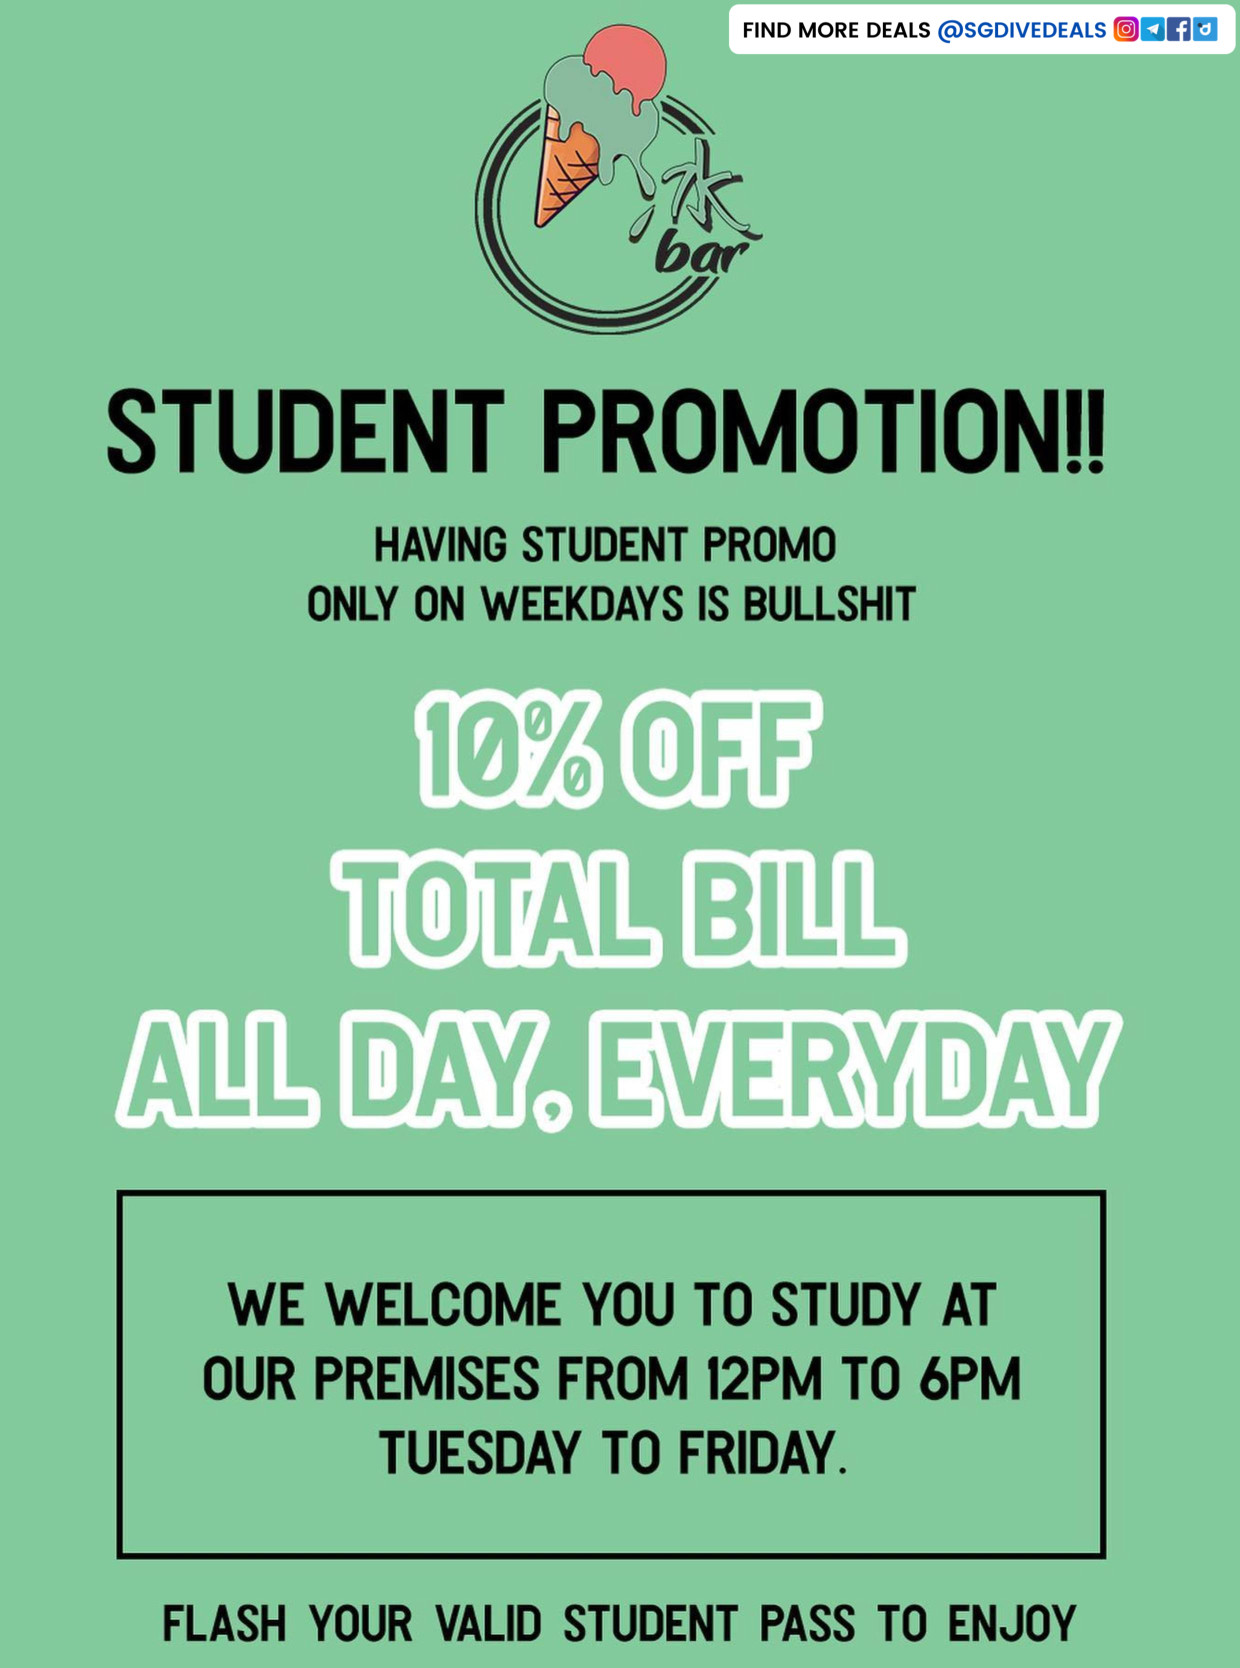 Icebar,Student Promotion - 10% off Total Bill